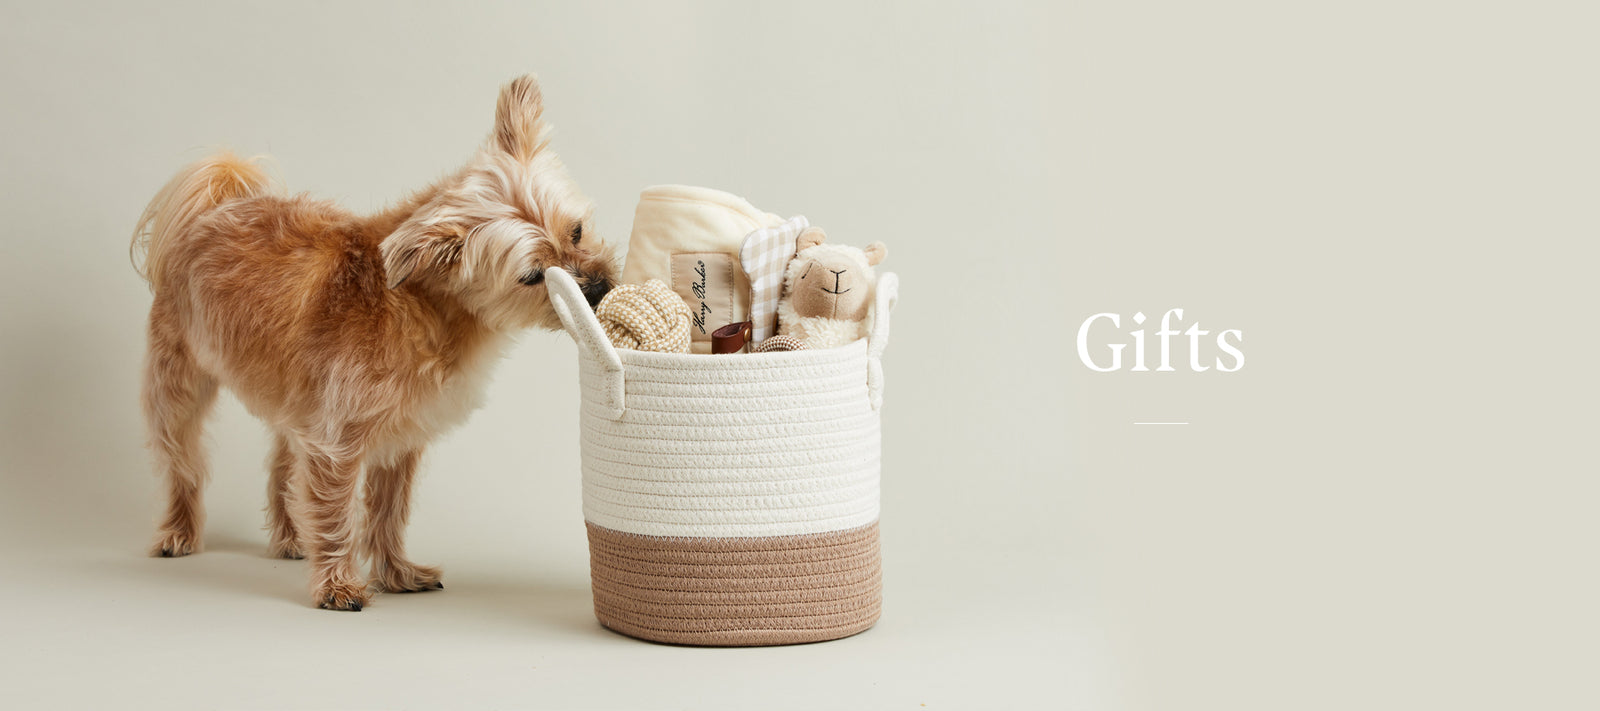 Luxury Dog Gifts - Toy Bundles & More